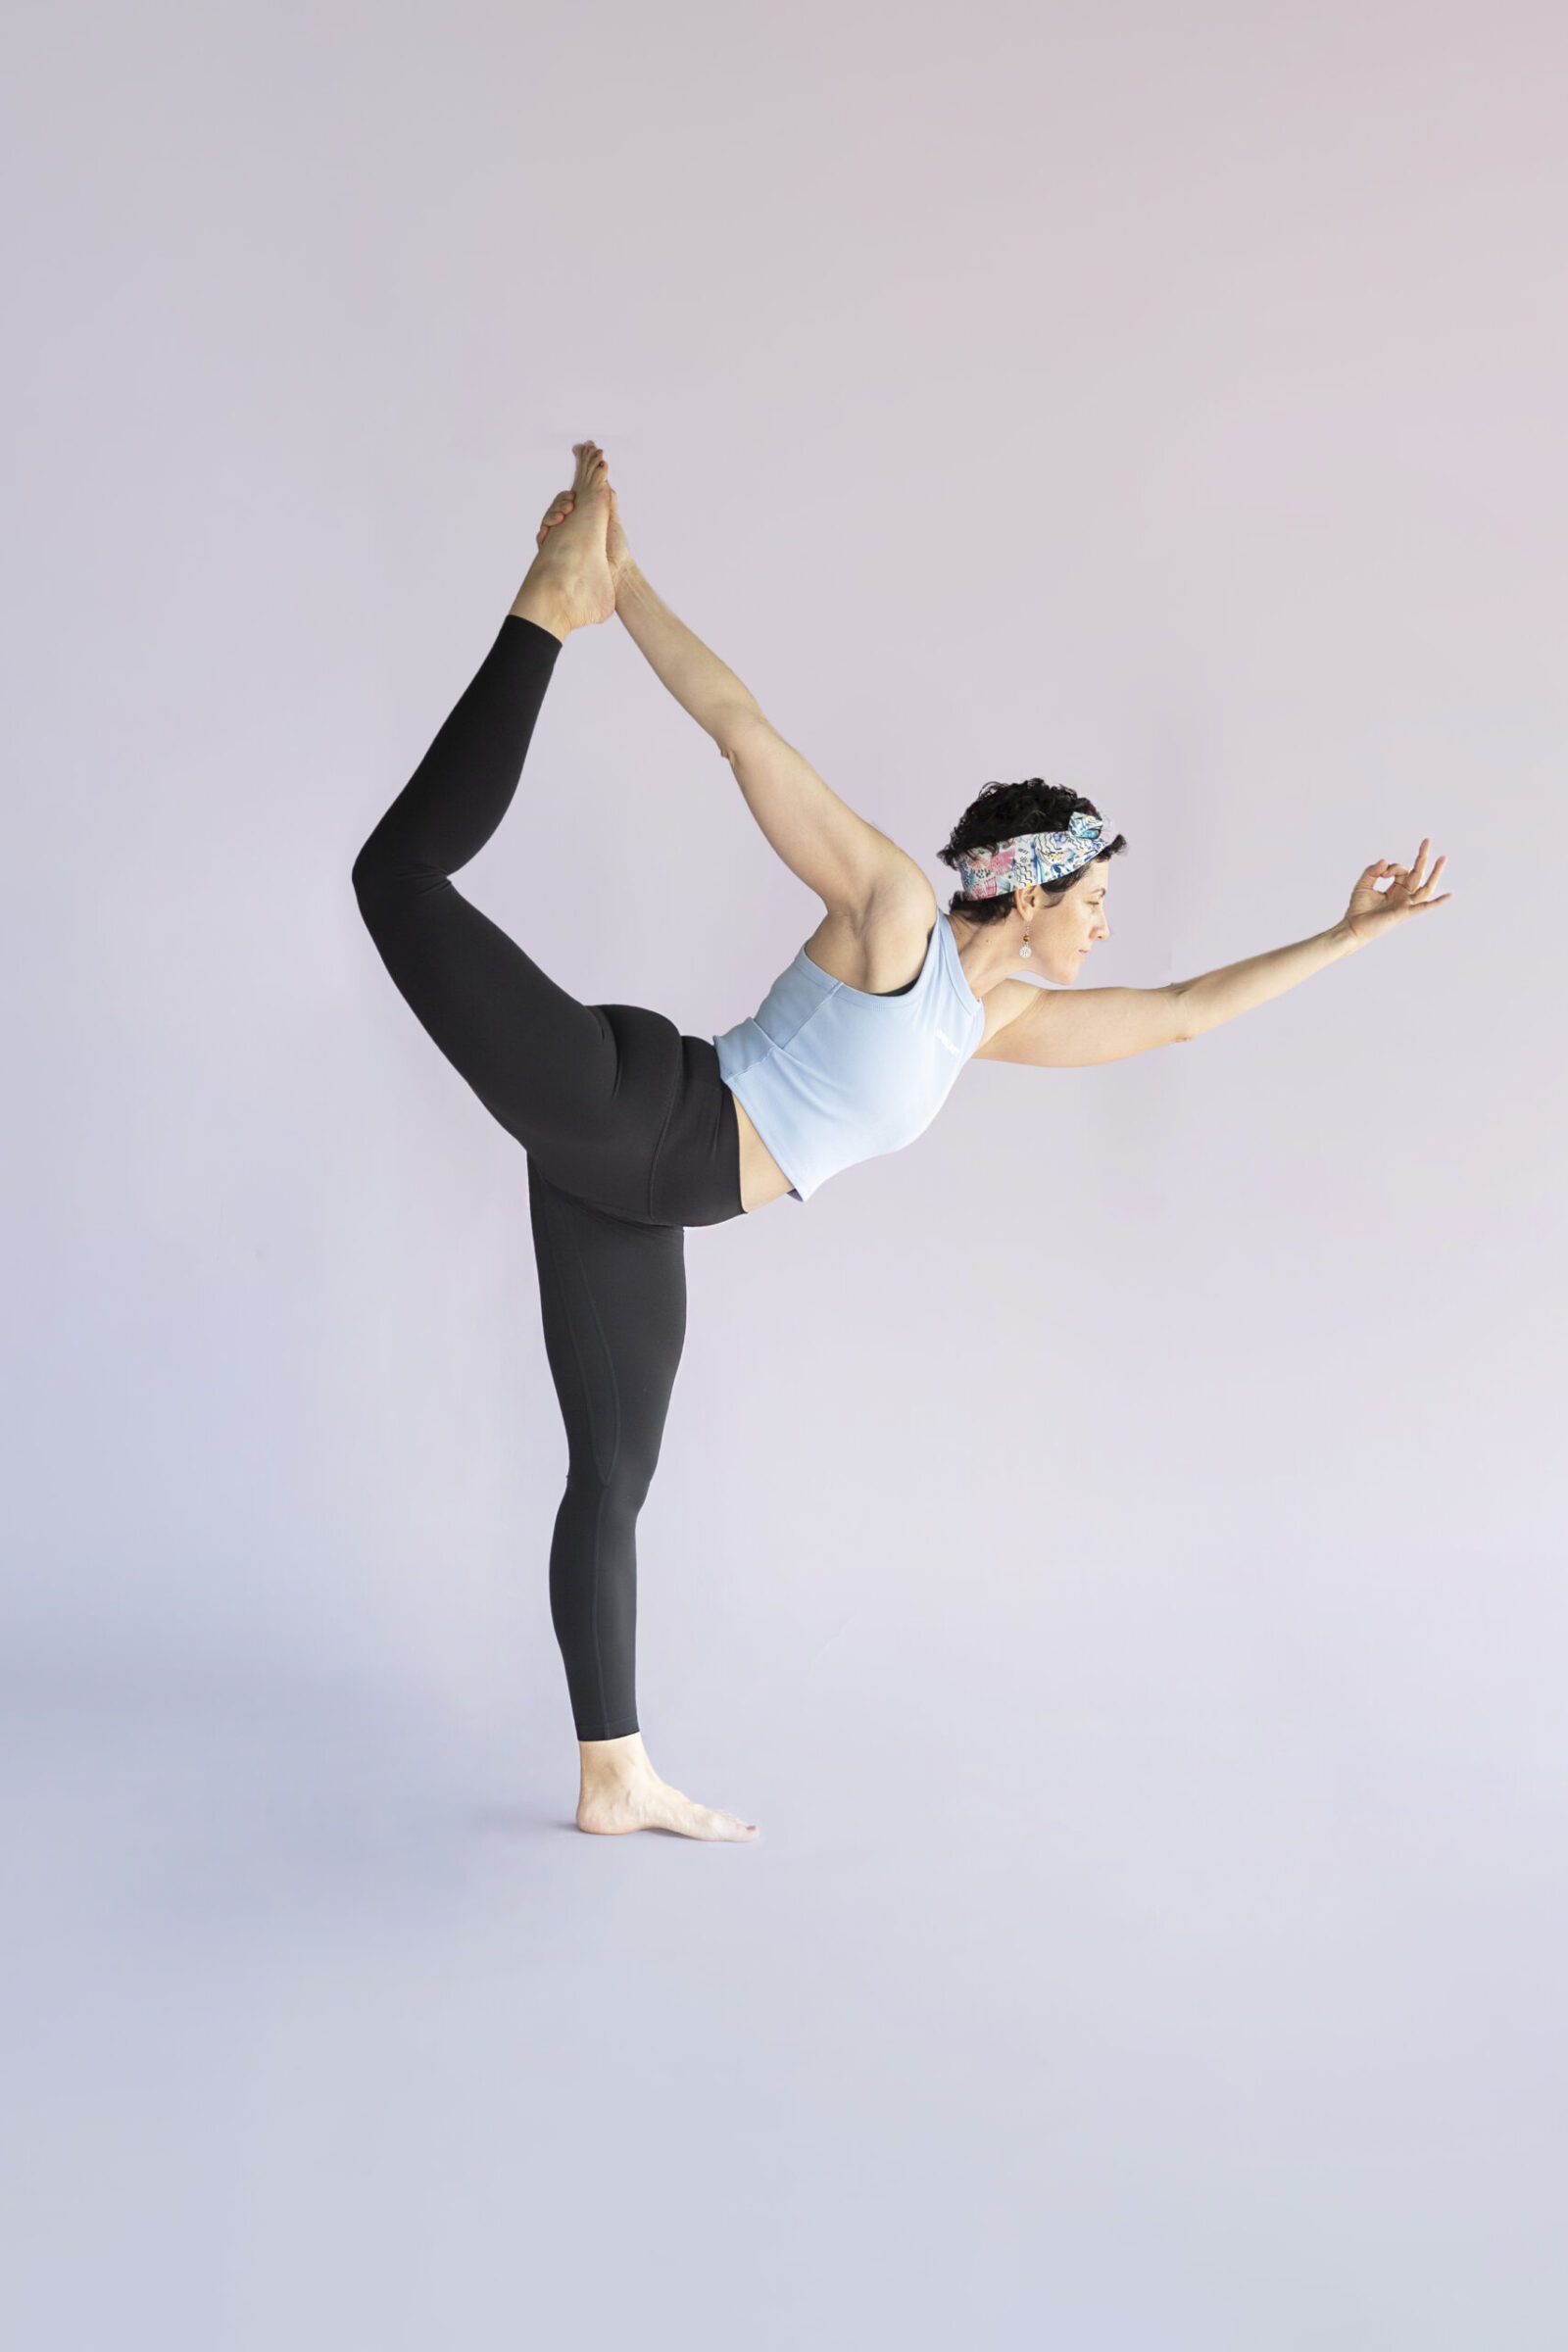 10 of the best yoga poses for stress relief